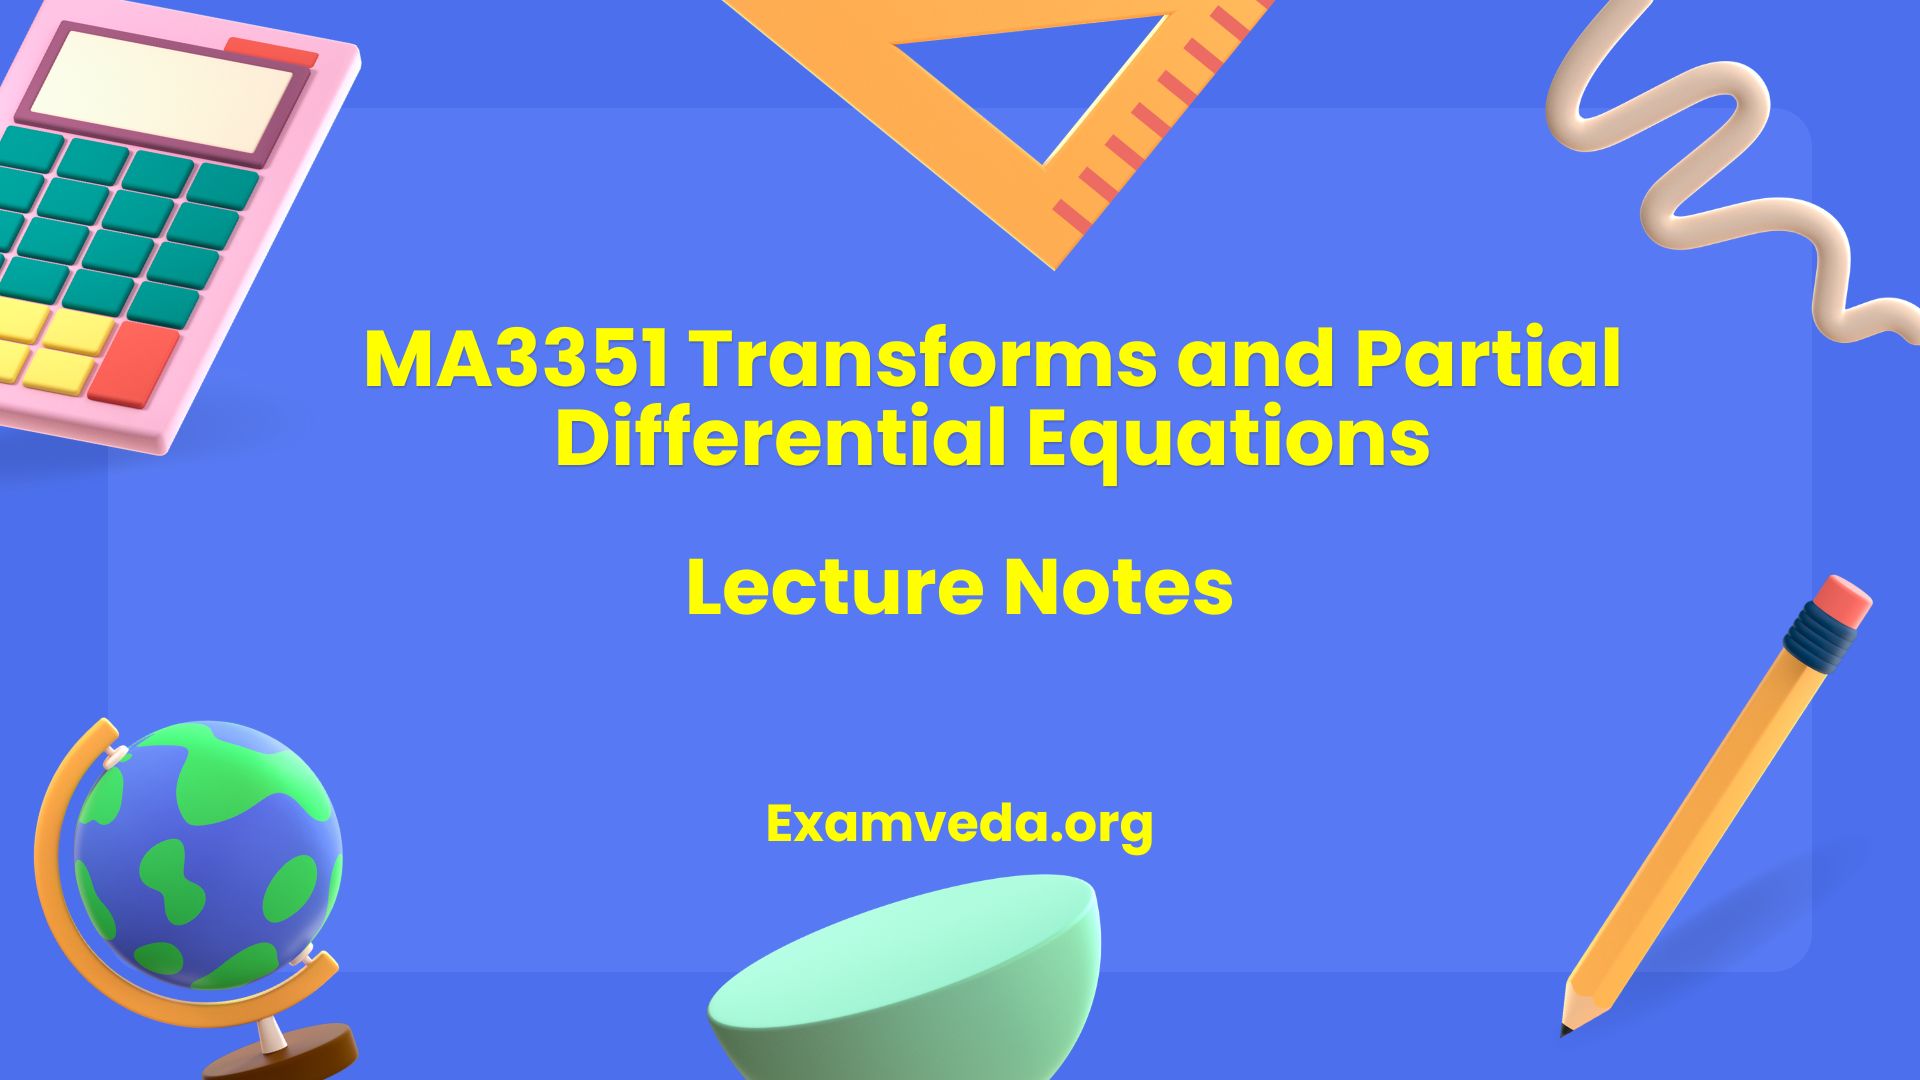 MA3351 Transforms and Partial Differential Equations Lecture Notes